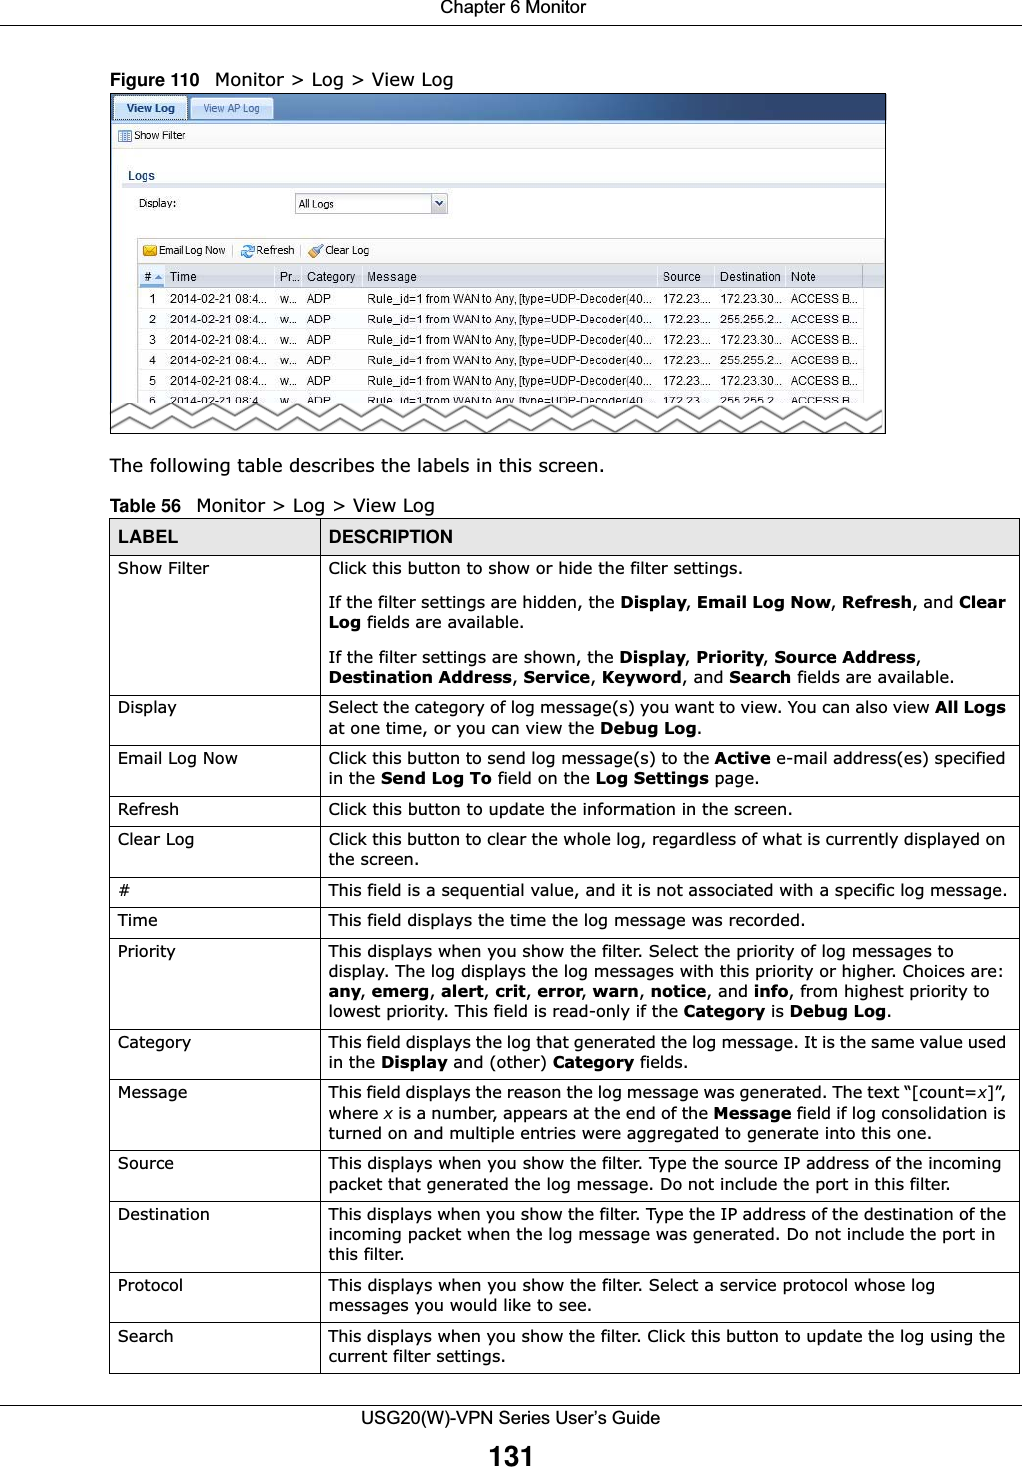  Chapter 6 MonitorUSG20(W)-VPN Series User’s Guide131Figure 110   Monitor &gt; Log &gt; View LogThe following table describes the labels in this screen.  Table 56   Monitor &gt; Log &gt; View LogLABEL DESCRIPTIONShow Filter Click this button to show or hide the filter settings.If the filter settings are hidden, the Display, Email Log Now, Refresh, and Clear Log fields are available.If the filter settings are shown, the Display, Priority, Source Address, Destination Address, Service, Keyword, and Search fields are available.Display Select the category of log message(s) you want to view. You can also view All Logs at one time, or you can view the Debug Log.Email Log Now Click this button to send log message(s) to the Active e-mail address(es) specified in the Send Log To field on the Log Settings page.Refresh Click this button to update the information in the screen.Clear Log Click this button to clear the whole log, regardless of what is currently displayed on the screen.# This field is a sequential value, and it is not associated with a specific log message.Time This field displays the time the log message was recorded.Priority This displays when you show the filter. Select the priority of log messages to display. The log displays the log messages with this priority or higher. Choices are: any, emerg, alert, crit, error, warn, notice, and info, from highest priority to lowest priority. This field is read-only if the Category is Debug Log. Category This field displays the log that generated the log message. It is the same value used in the Display and (other) Category fields.Message This field displays the reason the log message was generated. The text “[count=x]”, where x is a number, appears at the end of the Message field if log consolidation is turned on and multiple entries were aggregated to generate into this one.Source  This displays when you show the filter. Type the source IP address of the incoming packet that generated the log message. Do not include the port in this filter.Destination  This displays when you show the filter. Type the IP address of the destination of the incoming packet when the log message was generated. Do not include the port in this filter.Protocol This displays when you show the filter. Select a service protocol whose log messages you would like to see. Search This displays when you show the filter. Click this button to update the log using the current filter settings.